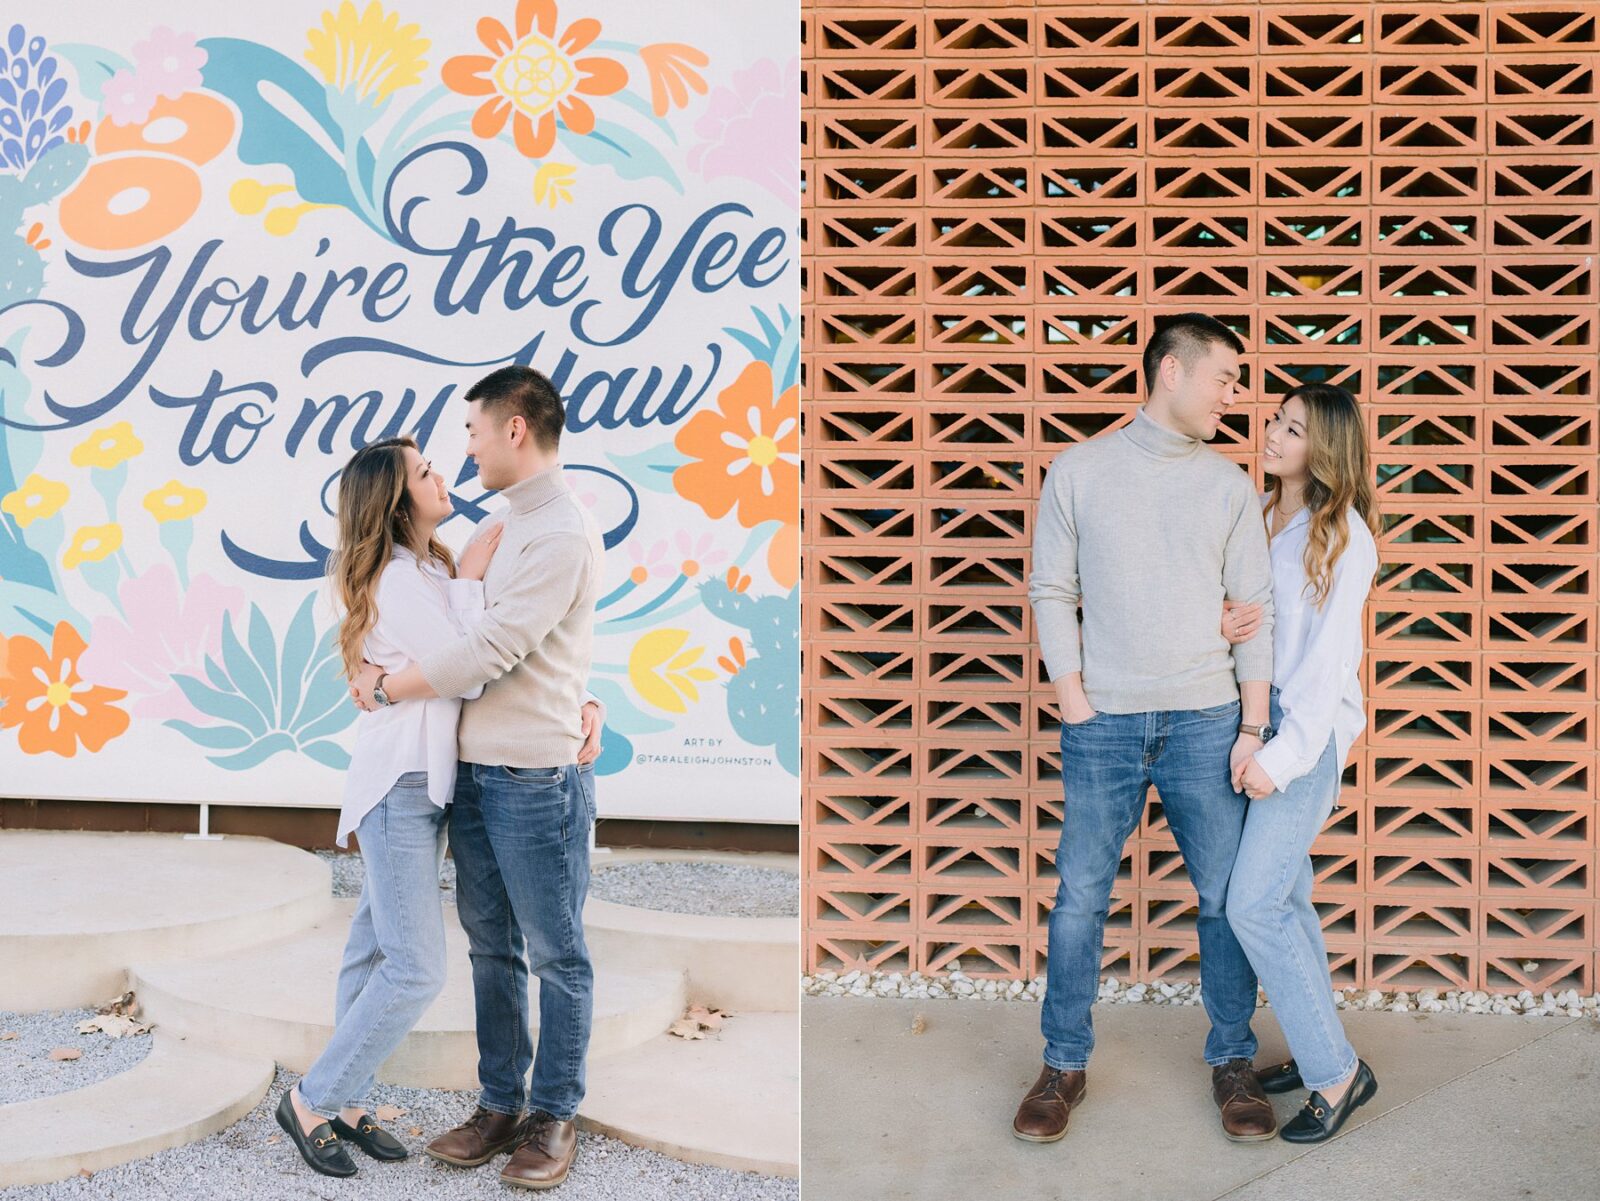 you're the yee to my haw mural, austin kendra scott mural, kendra scott flagship building, south congress hotel photography location, neutral engagement session outfit, photos by Tara Lyons Photography, austin wedding photographer